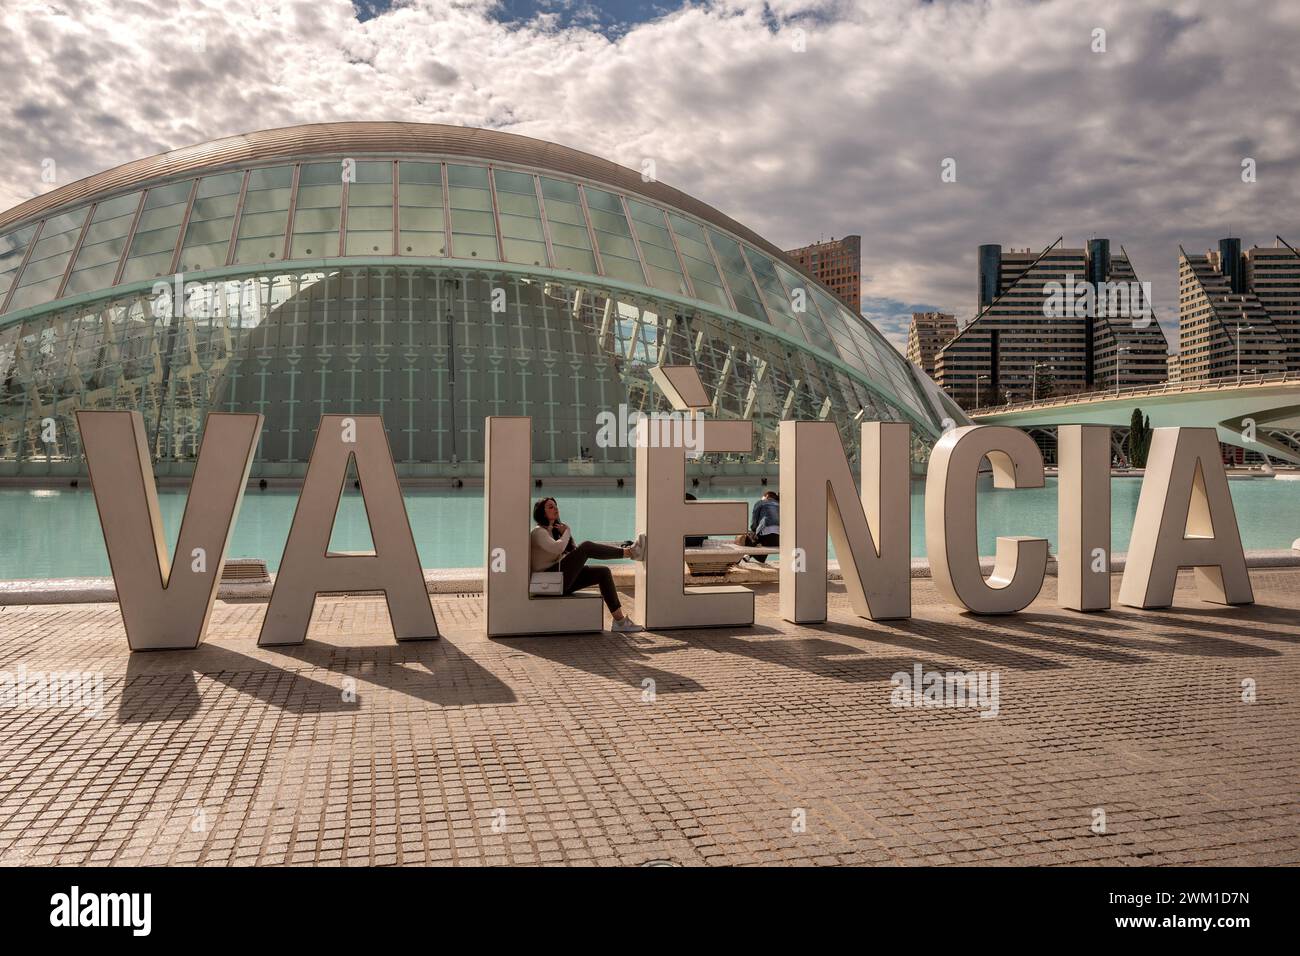 Valencia, February 19th 2024: Valencia sign at the City of Arts and Sciences complex Stock Photo